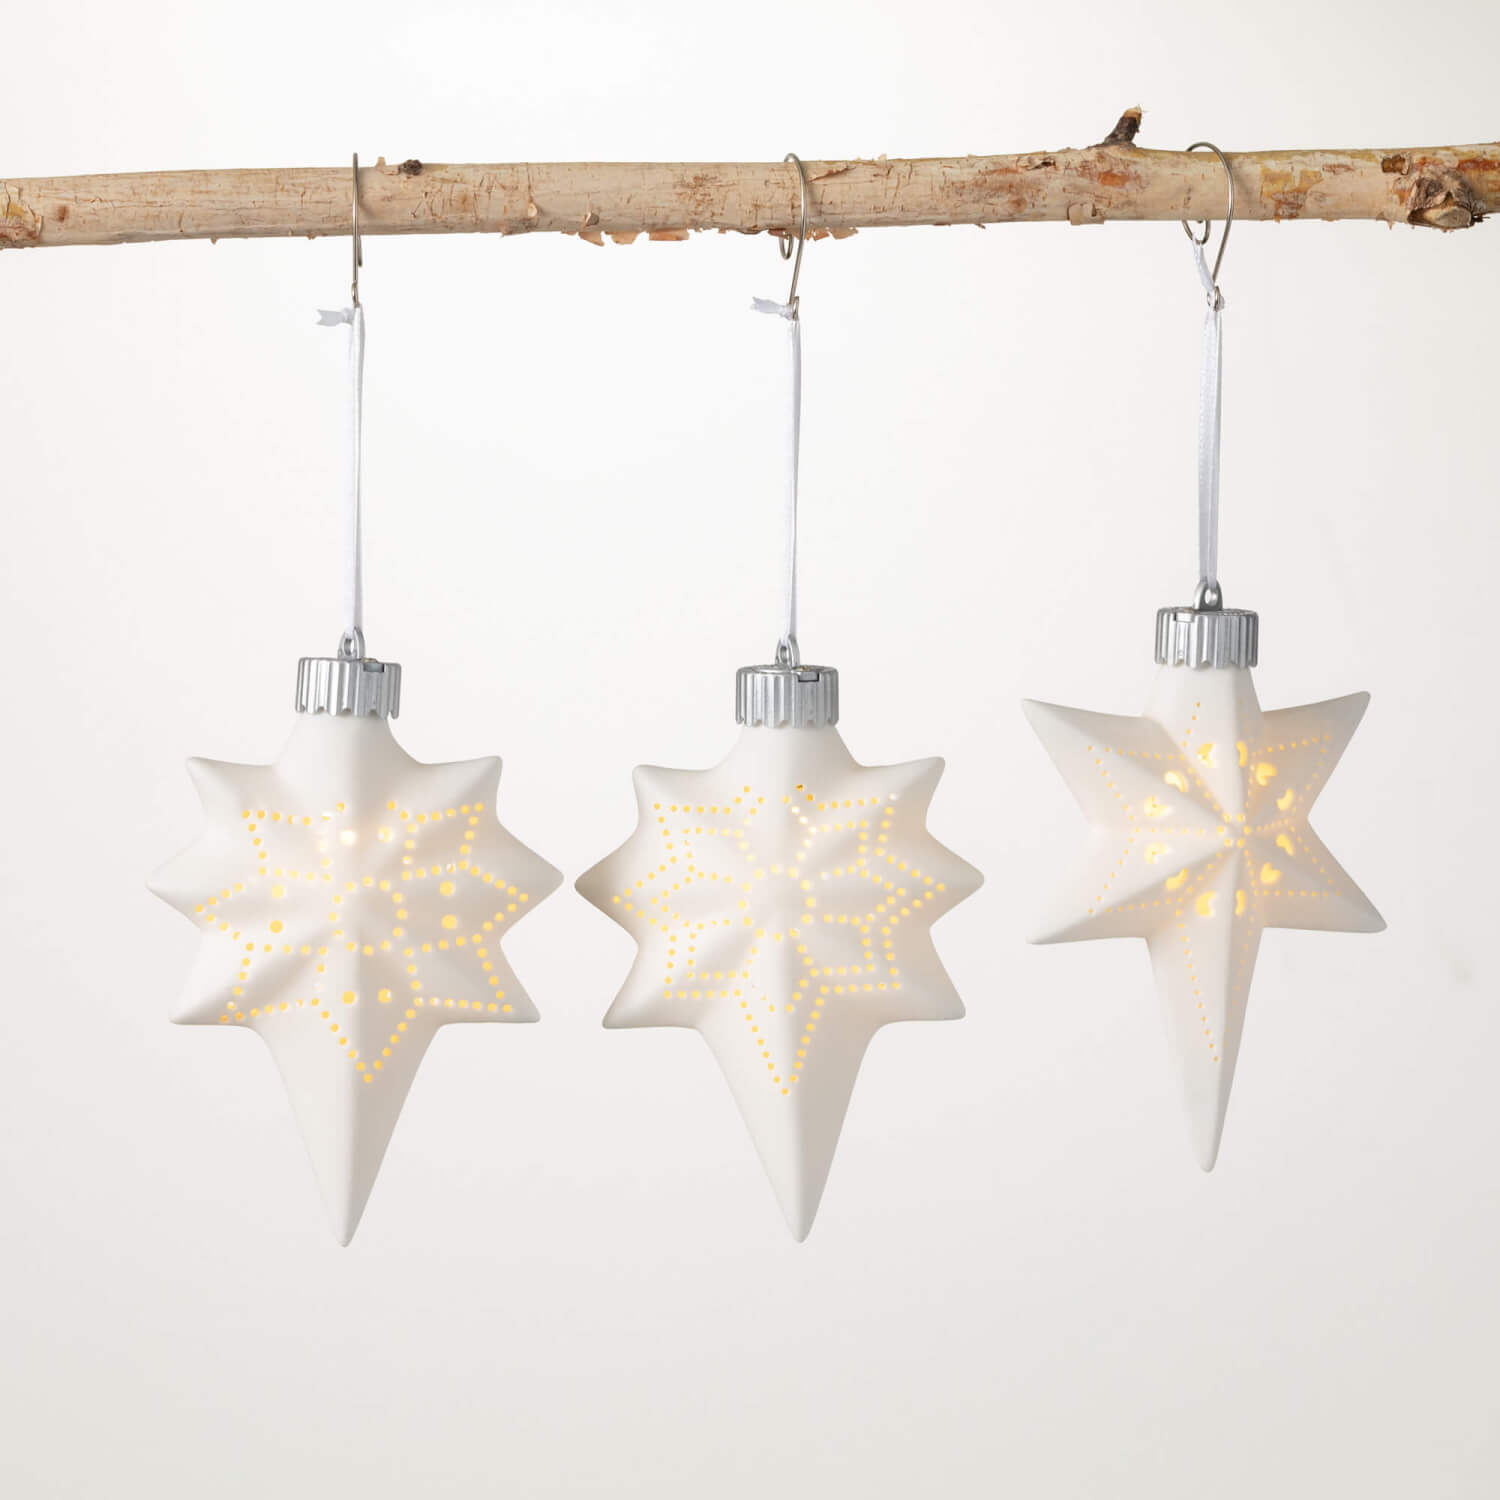 Lighted Star Ornament - Zinnias Gift Boutique